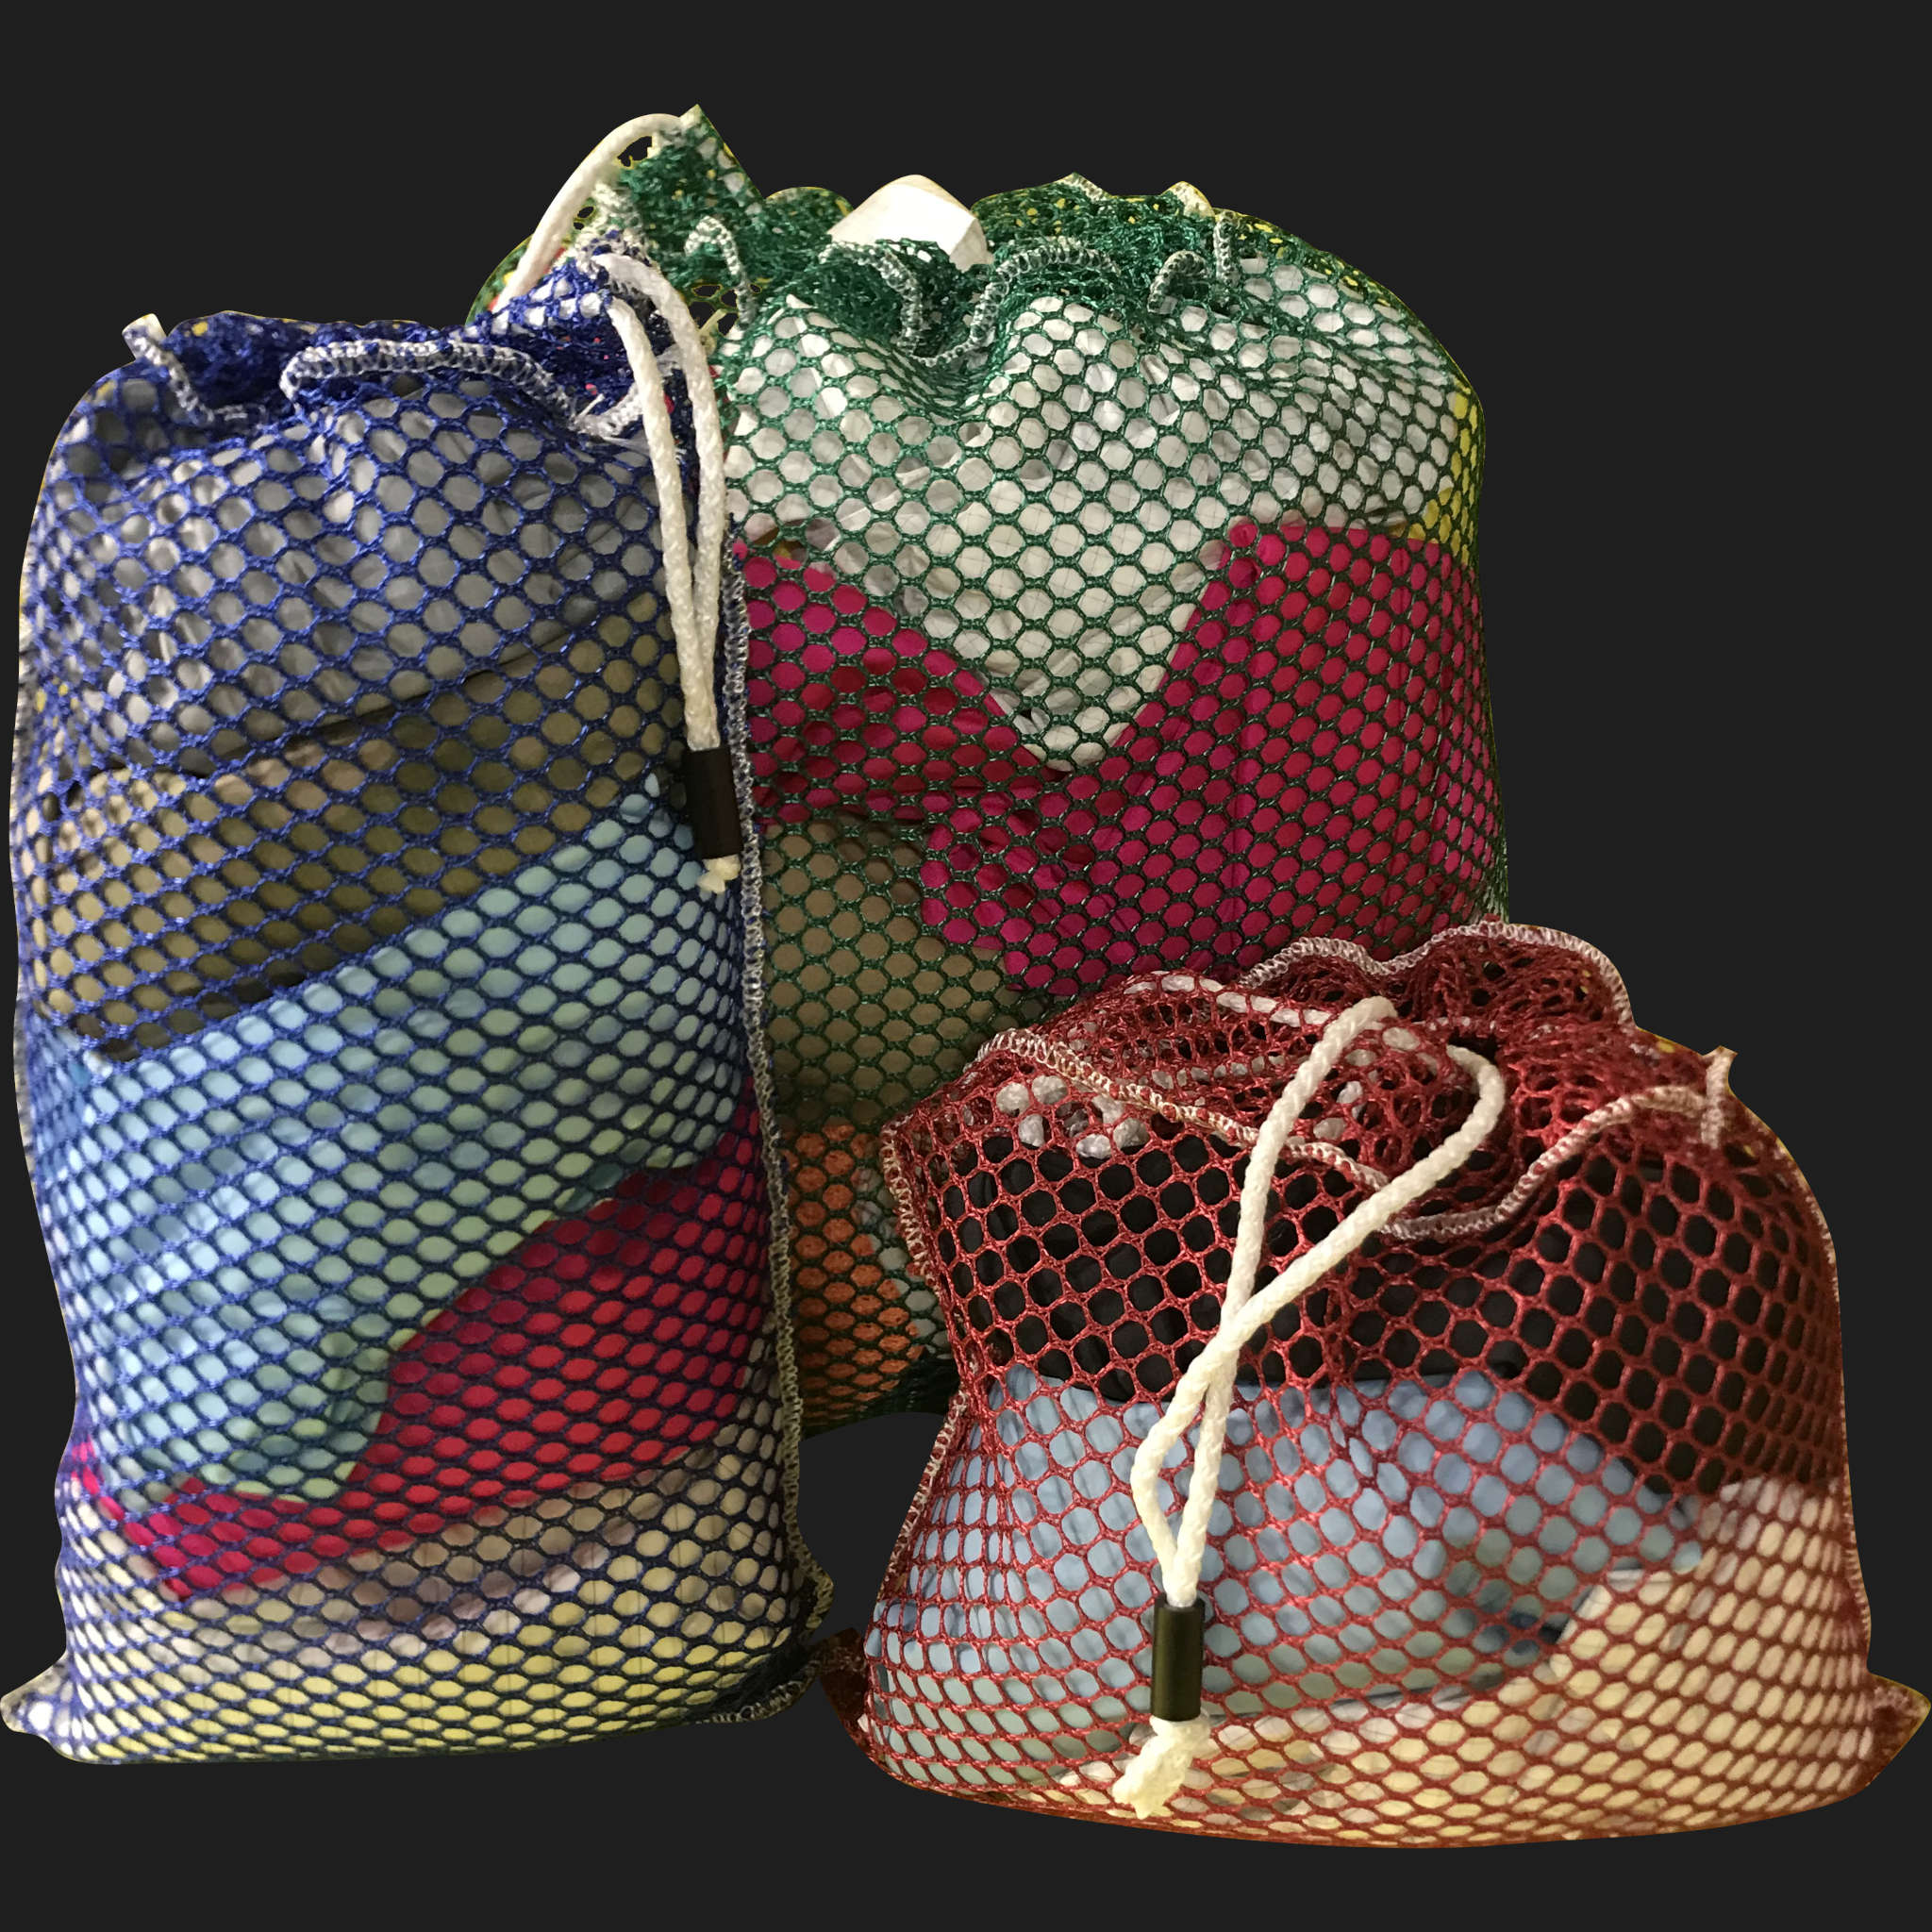 50" x 64" Customized Mesh-Net-Laundry Bags Heavy Duty with Cord and barrellock closure